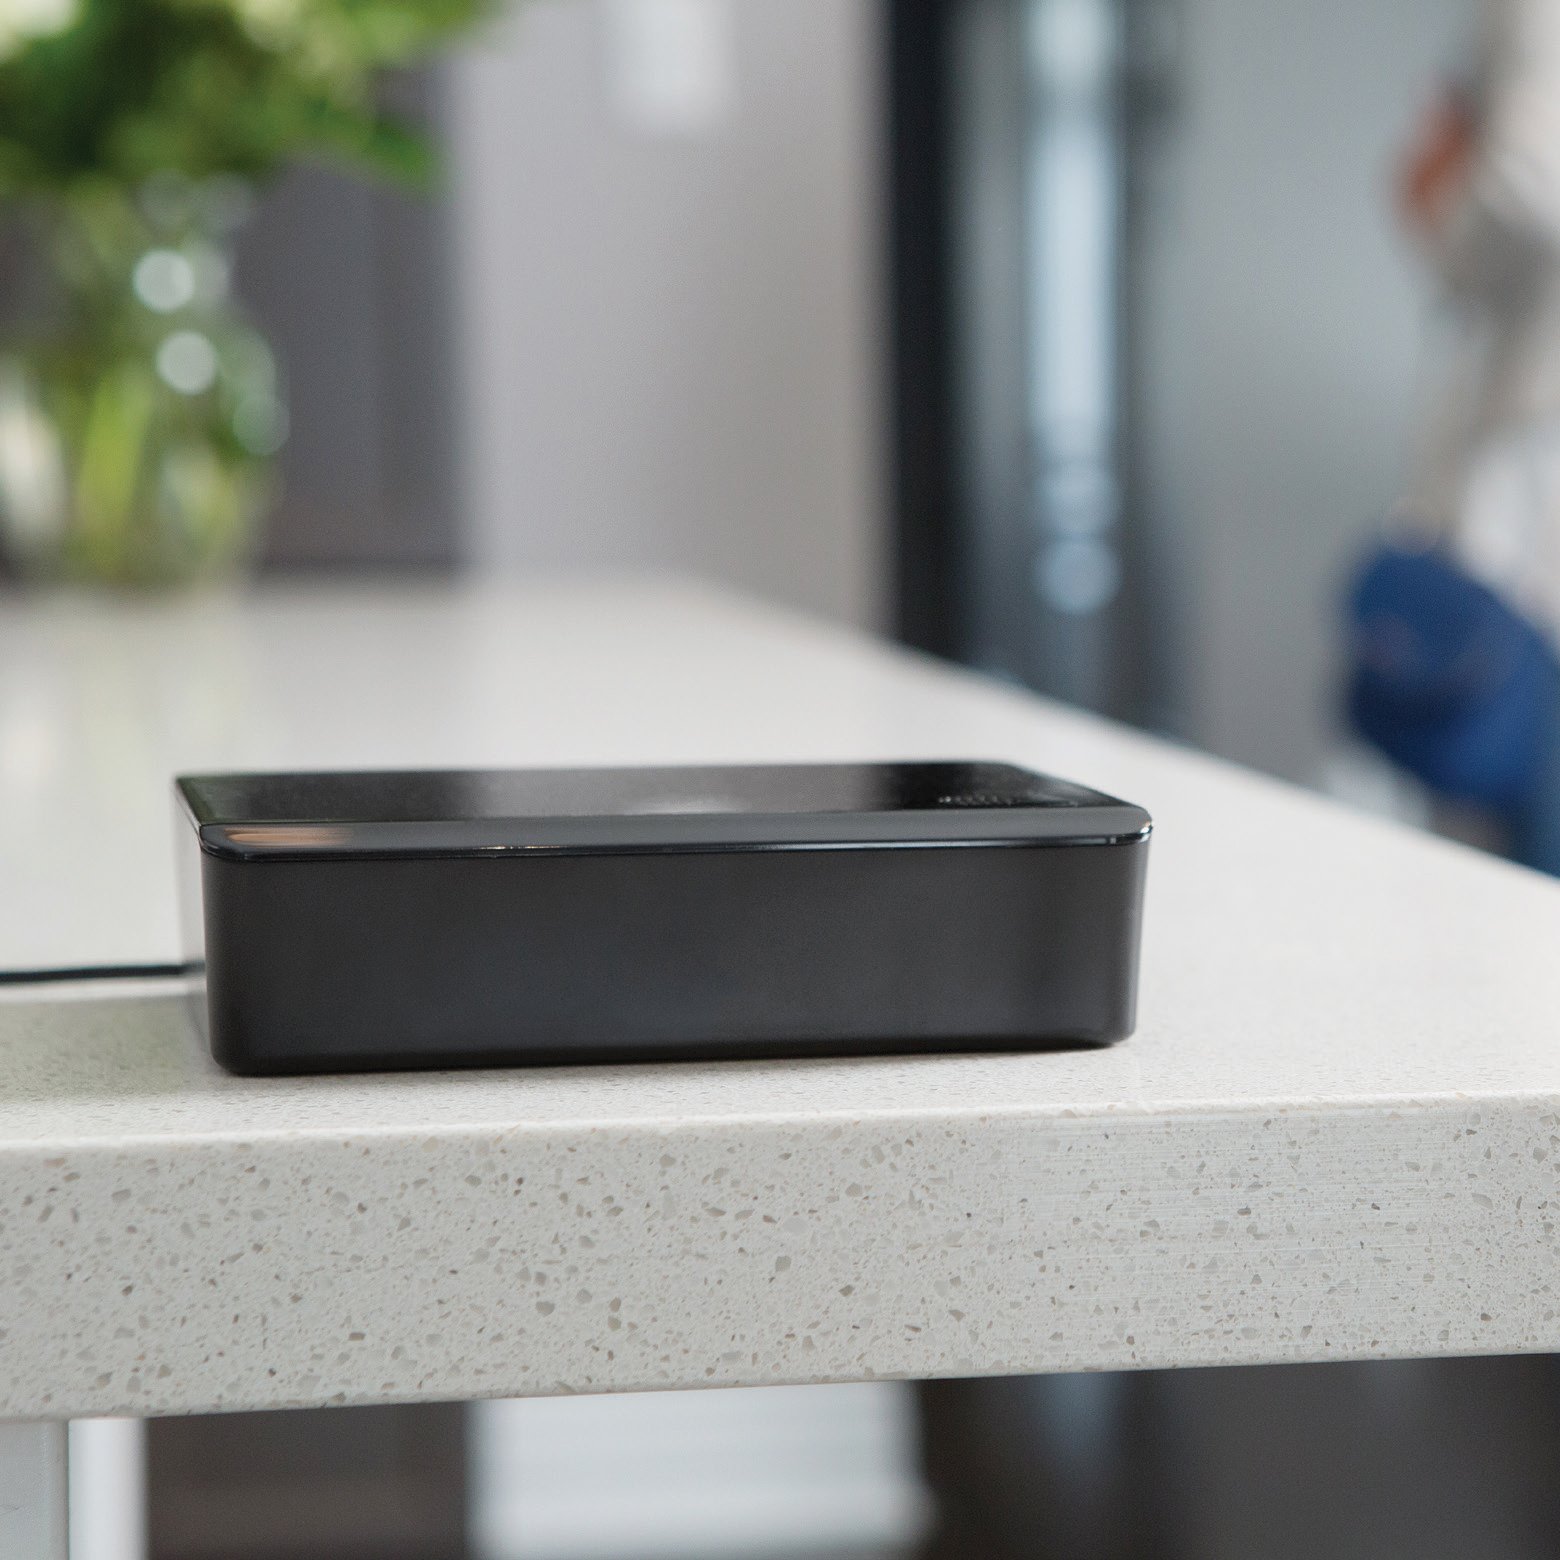 image of a smart device used for home automation sitting on a countertop